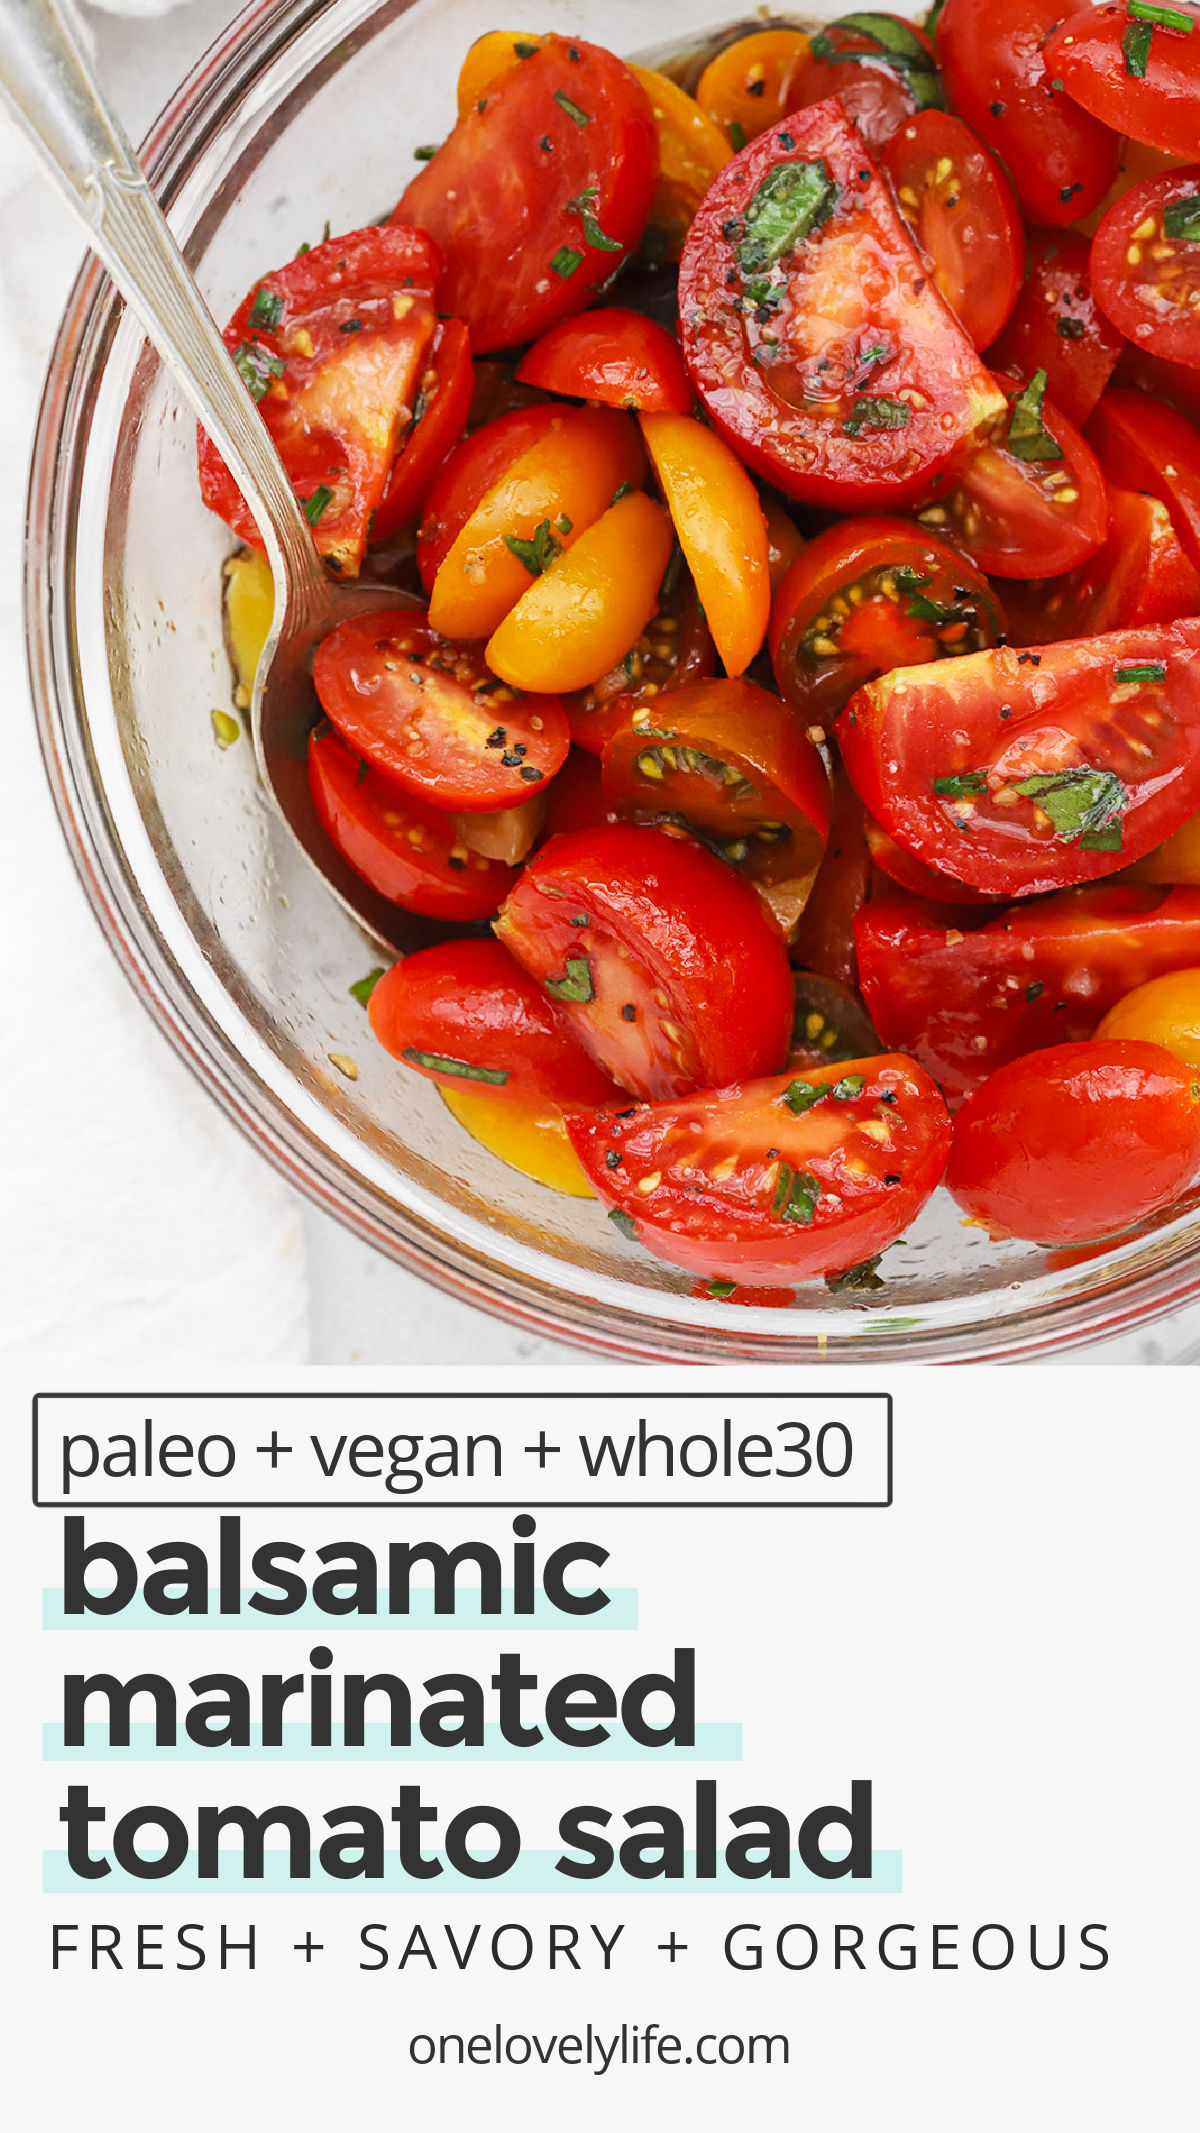 Easy Balsamic Marinated Tomato Salad - You only need 6 ingredients to make delicious balsamic marinated tomatoes. Serve them as a fresh side, or use them as a topping! // balsamic tomatoes // marinated tomatoes // tomato salad recipe // tomato dressing // summer side dish // healthy tomato recipe // healthy salad // side salad // tomato side dish // paleo // whole30 // vegan // vegetarian // gluten-free